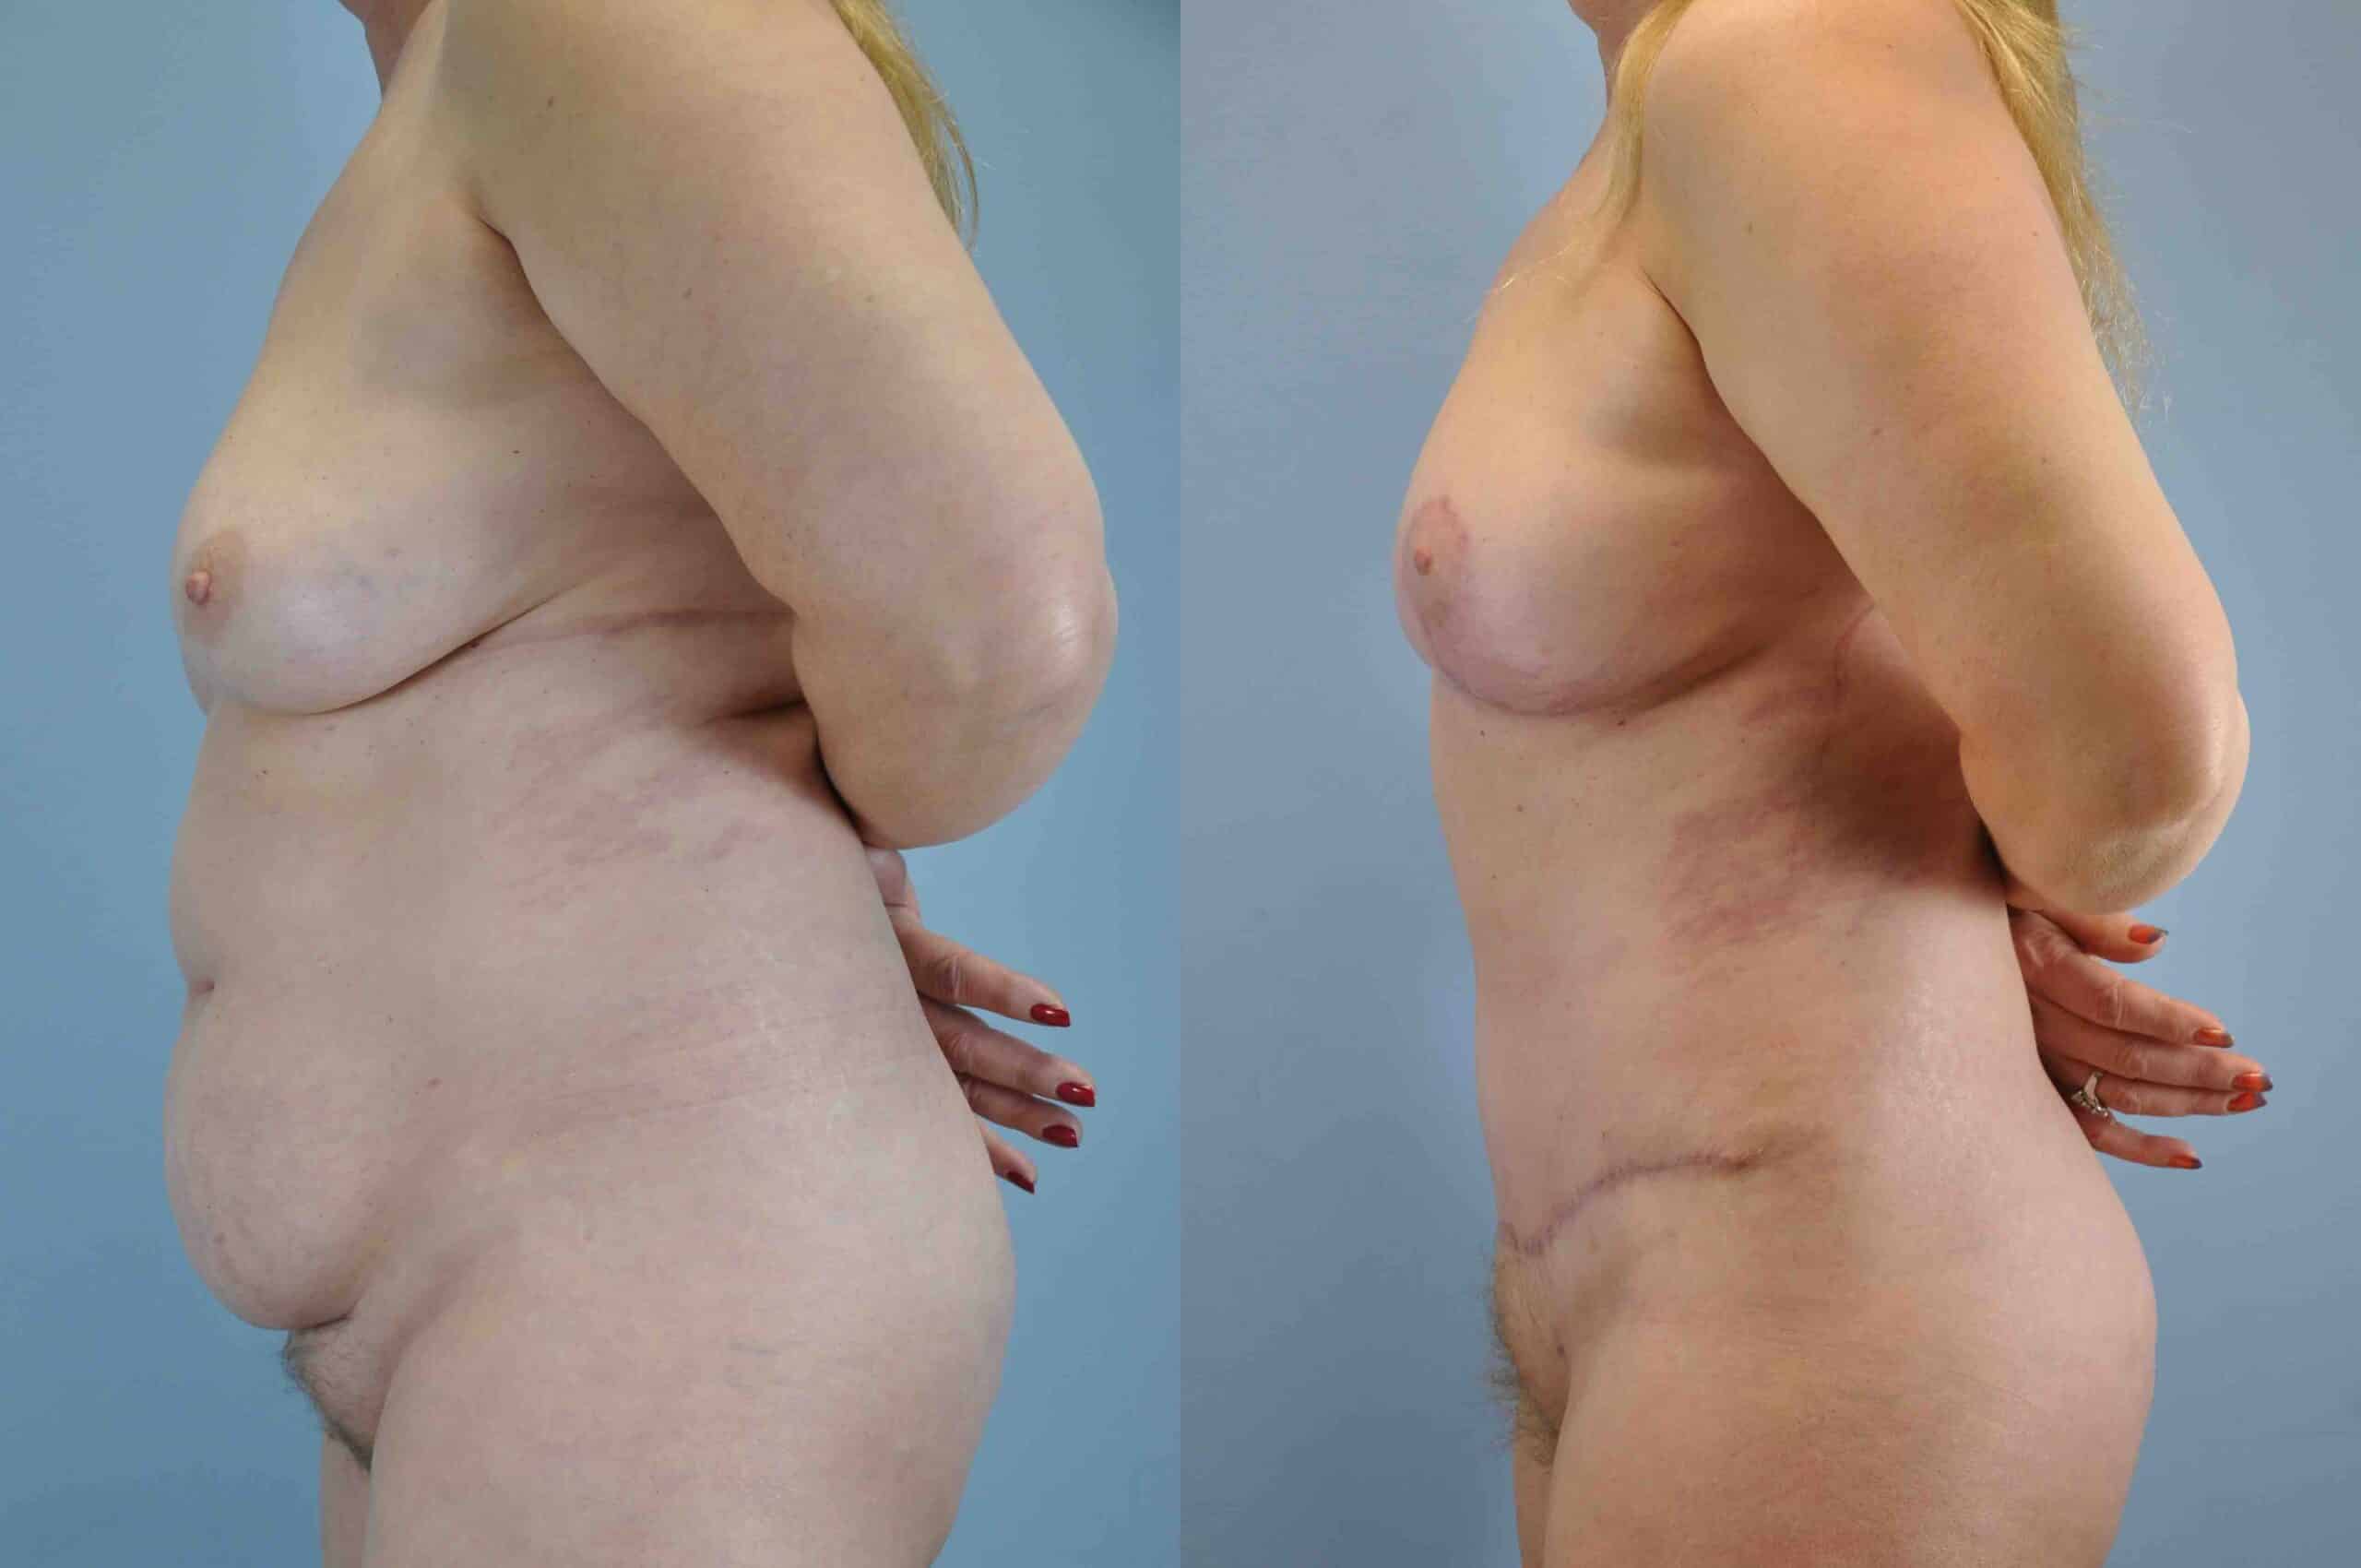 Before and after, 1 yr post op from Tummy Tuck, Breast Lift/Mastopexy, VASER Abdomen Flanks & Back performed by Dr. Paul Vanek (side view)